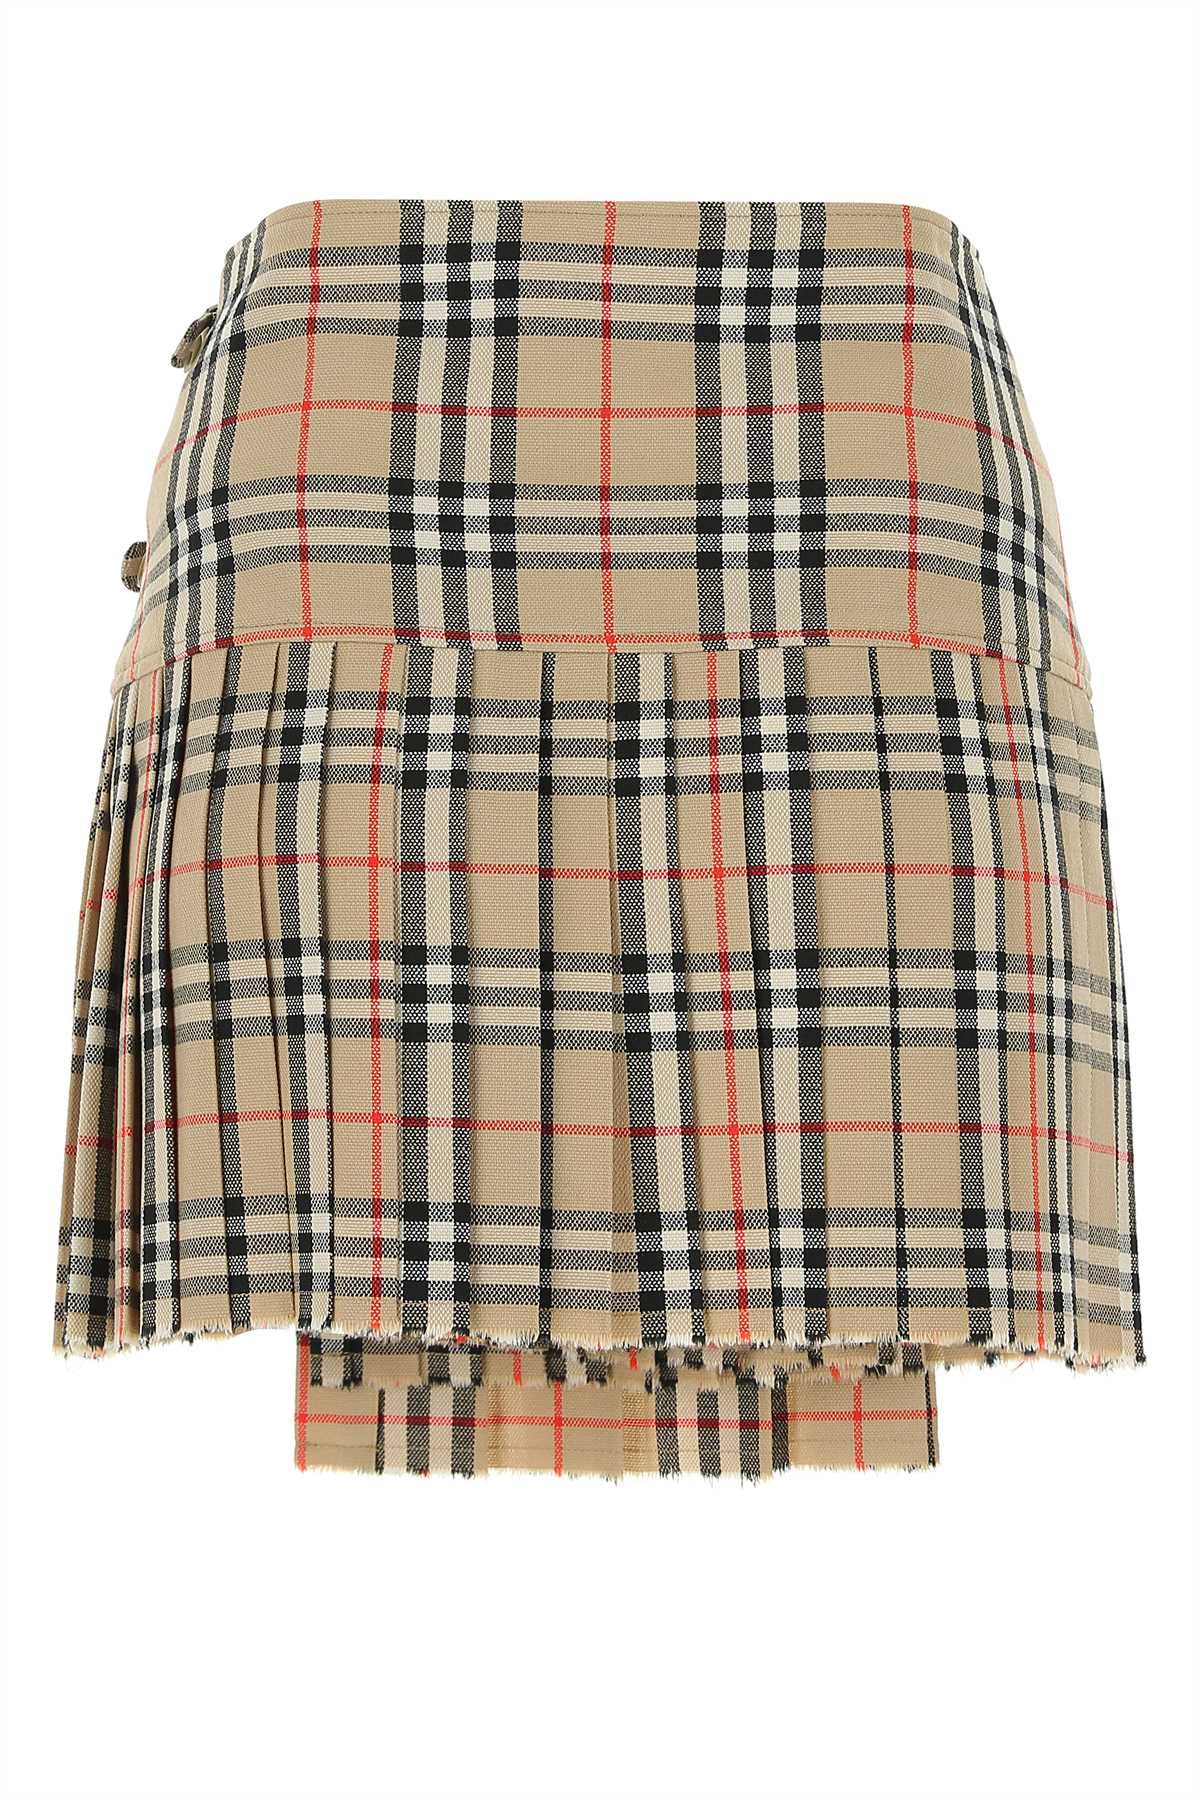 Burberry Embroidered Wool Mini Skirt In A7028